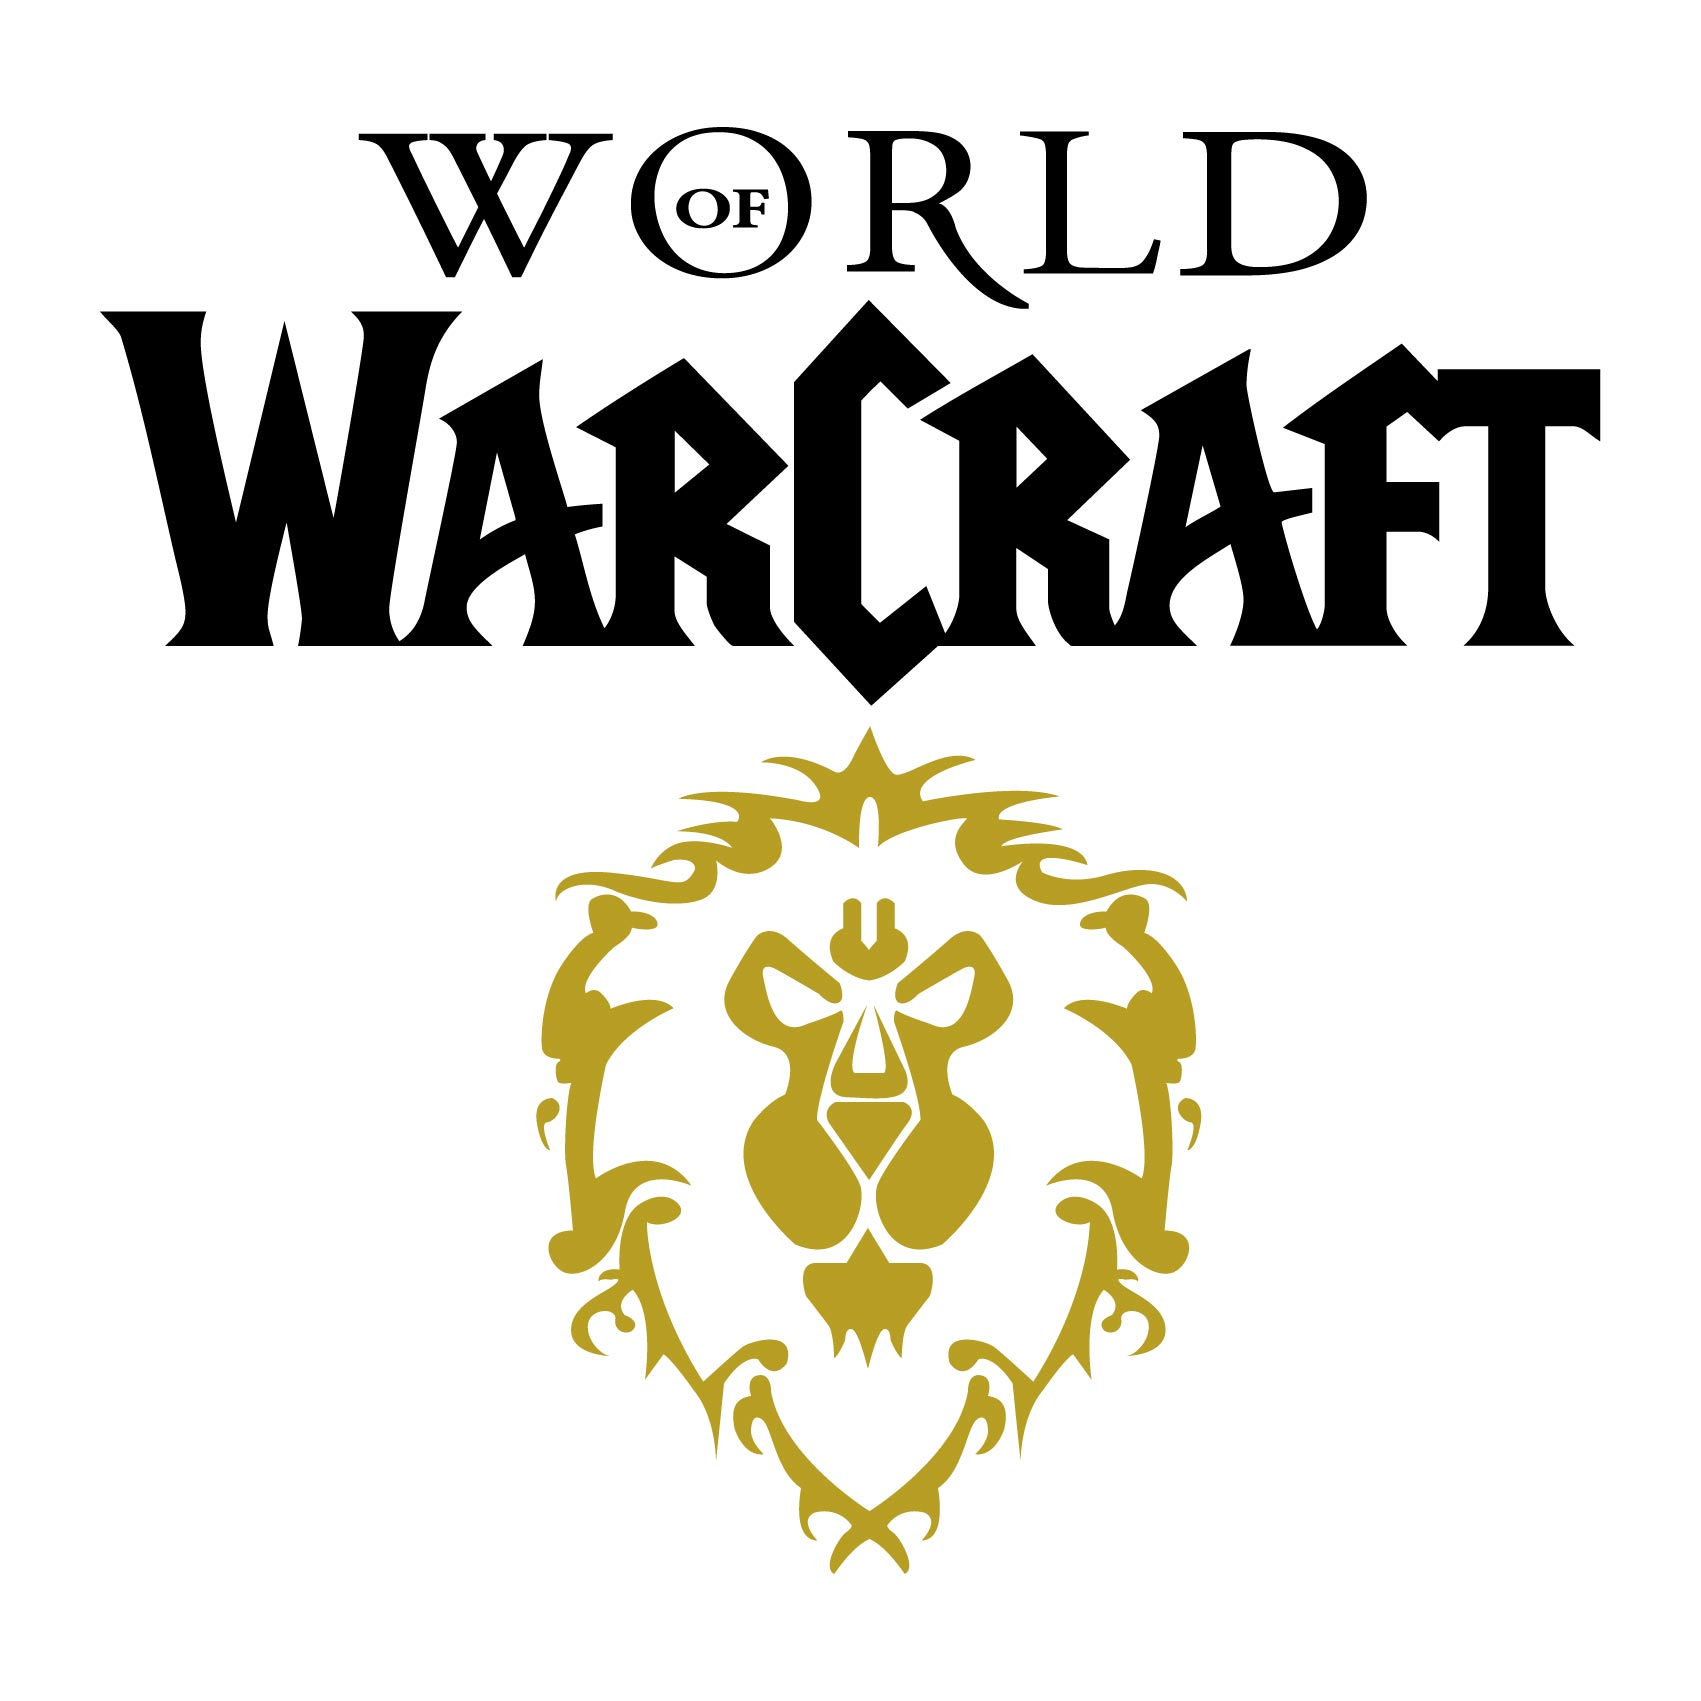 stickers-alliance-world-of-warcraft-ref18wow-stickers-muraux-world-of-warcraft-autocollant-mural-jeux-video-sticker-gamer-deco-gaming-salon-chambre-(2)